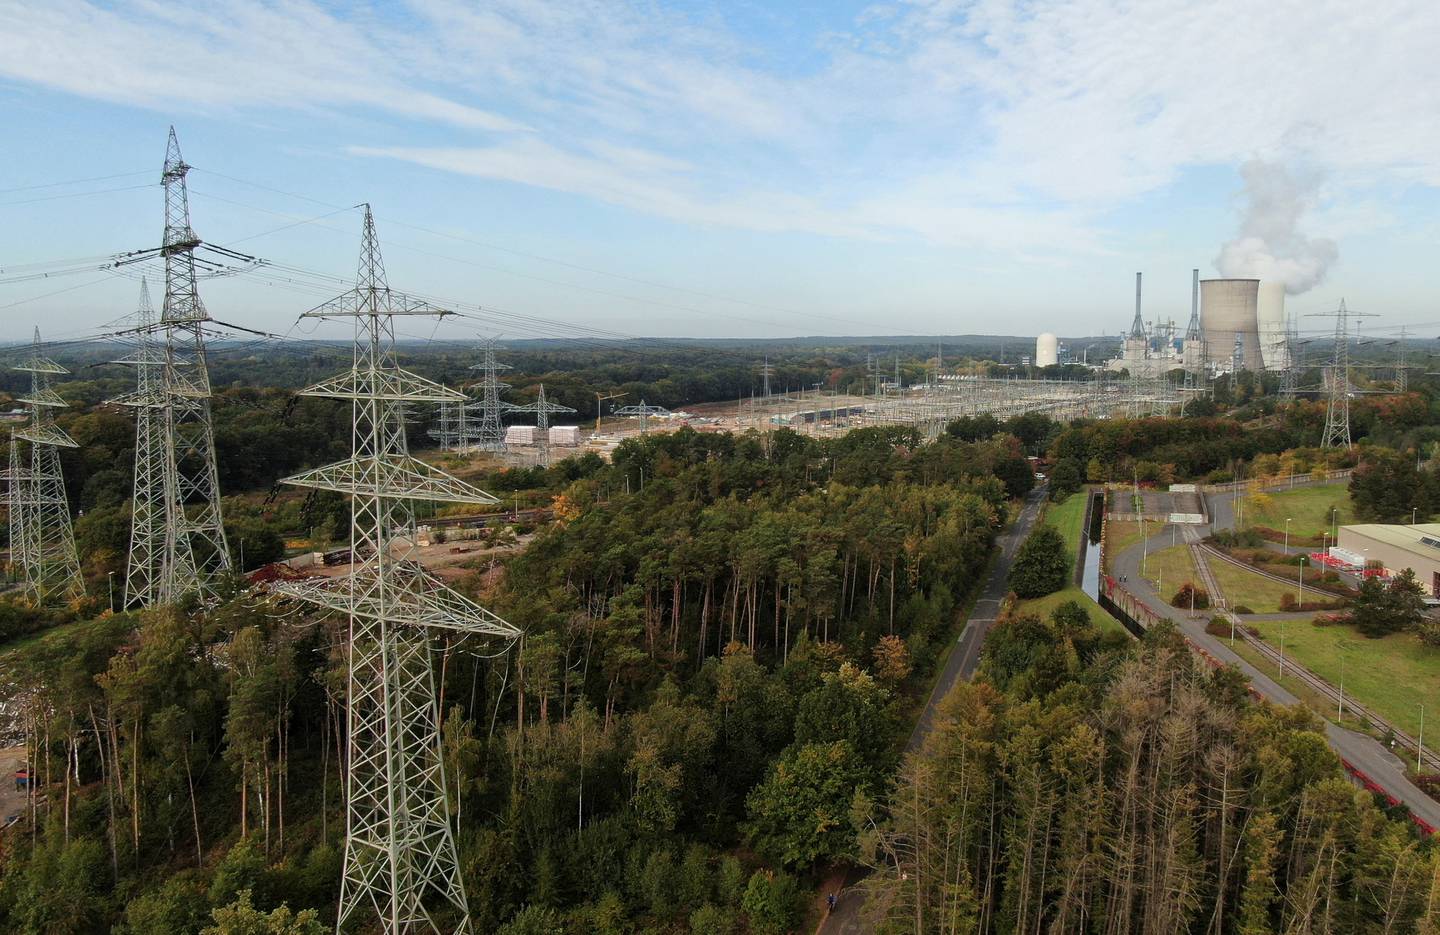 Germany's Emsland nuclear plant will remain on standby longer than planned after France reduced electricity exports. Reuters 